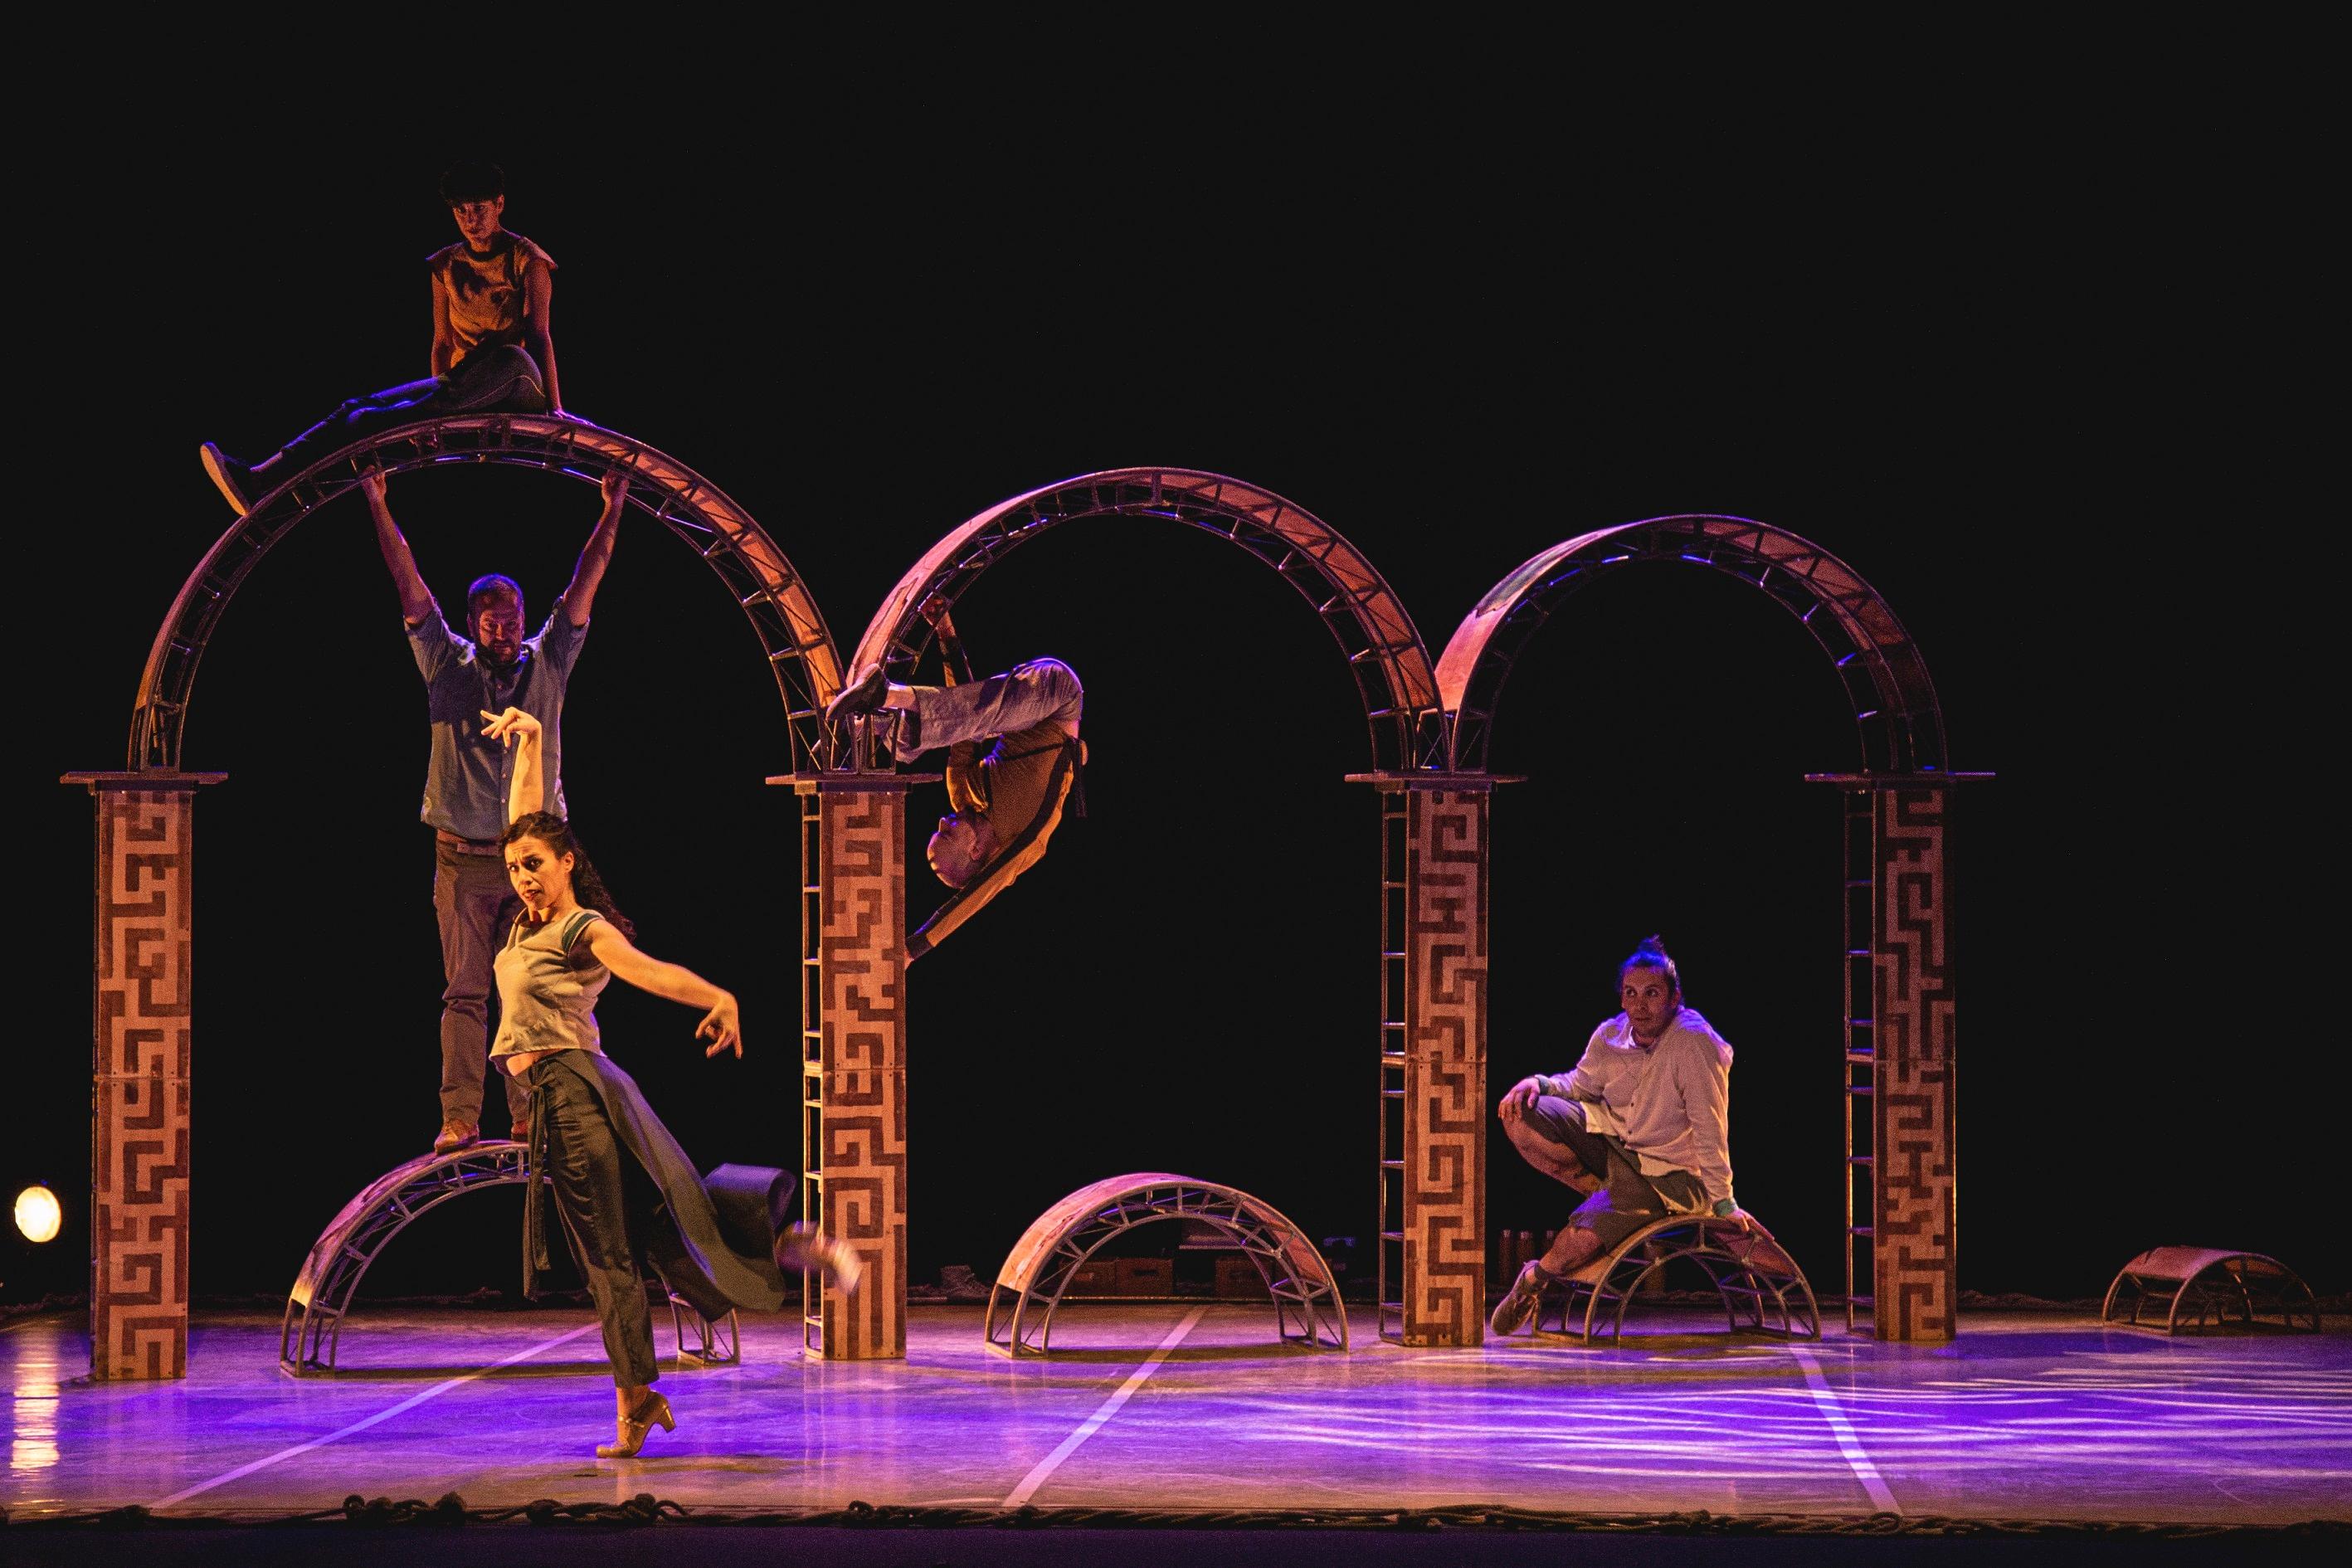 In view of the overwhelming response to the Spanish circus company Vaivén Circo's acrobatic show "Esencial", an additional performance will be held on July 30 at 7.30pm. Tickets for the show will be available at URBTIX from tomorrow (May 25).
